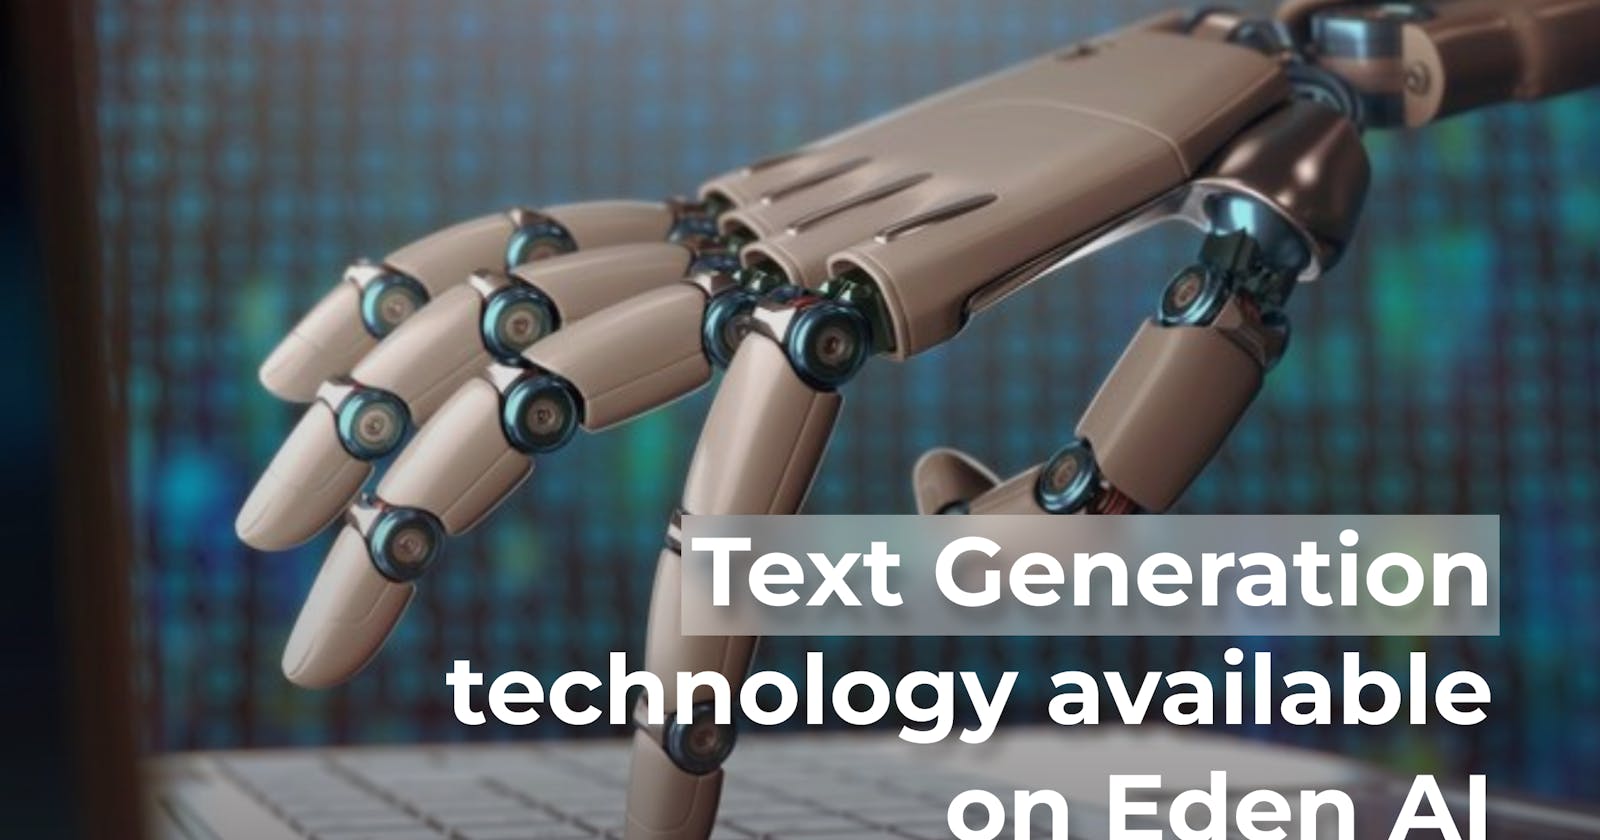 NEW: AI Text Generators available on Eden AI